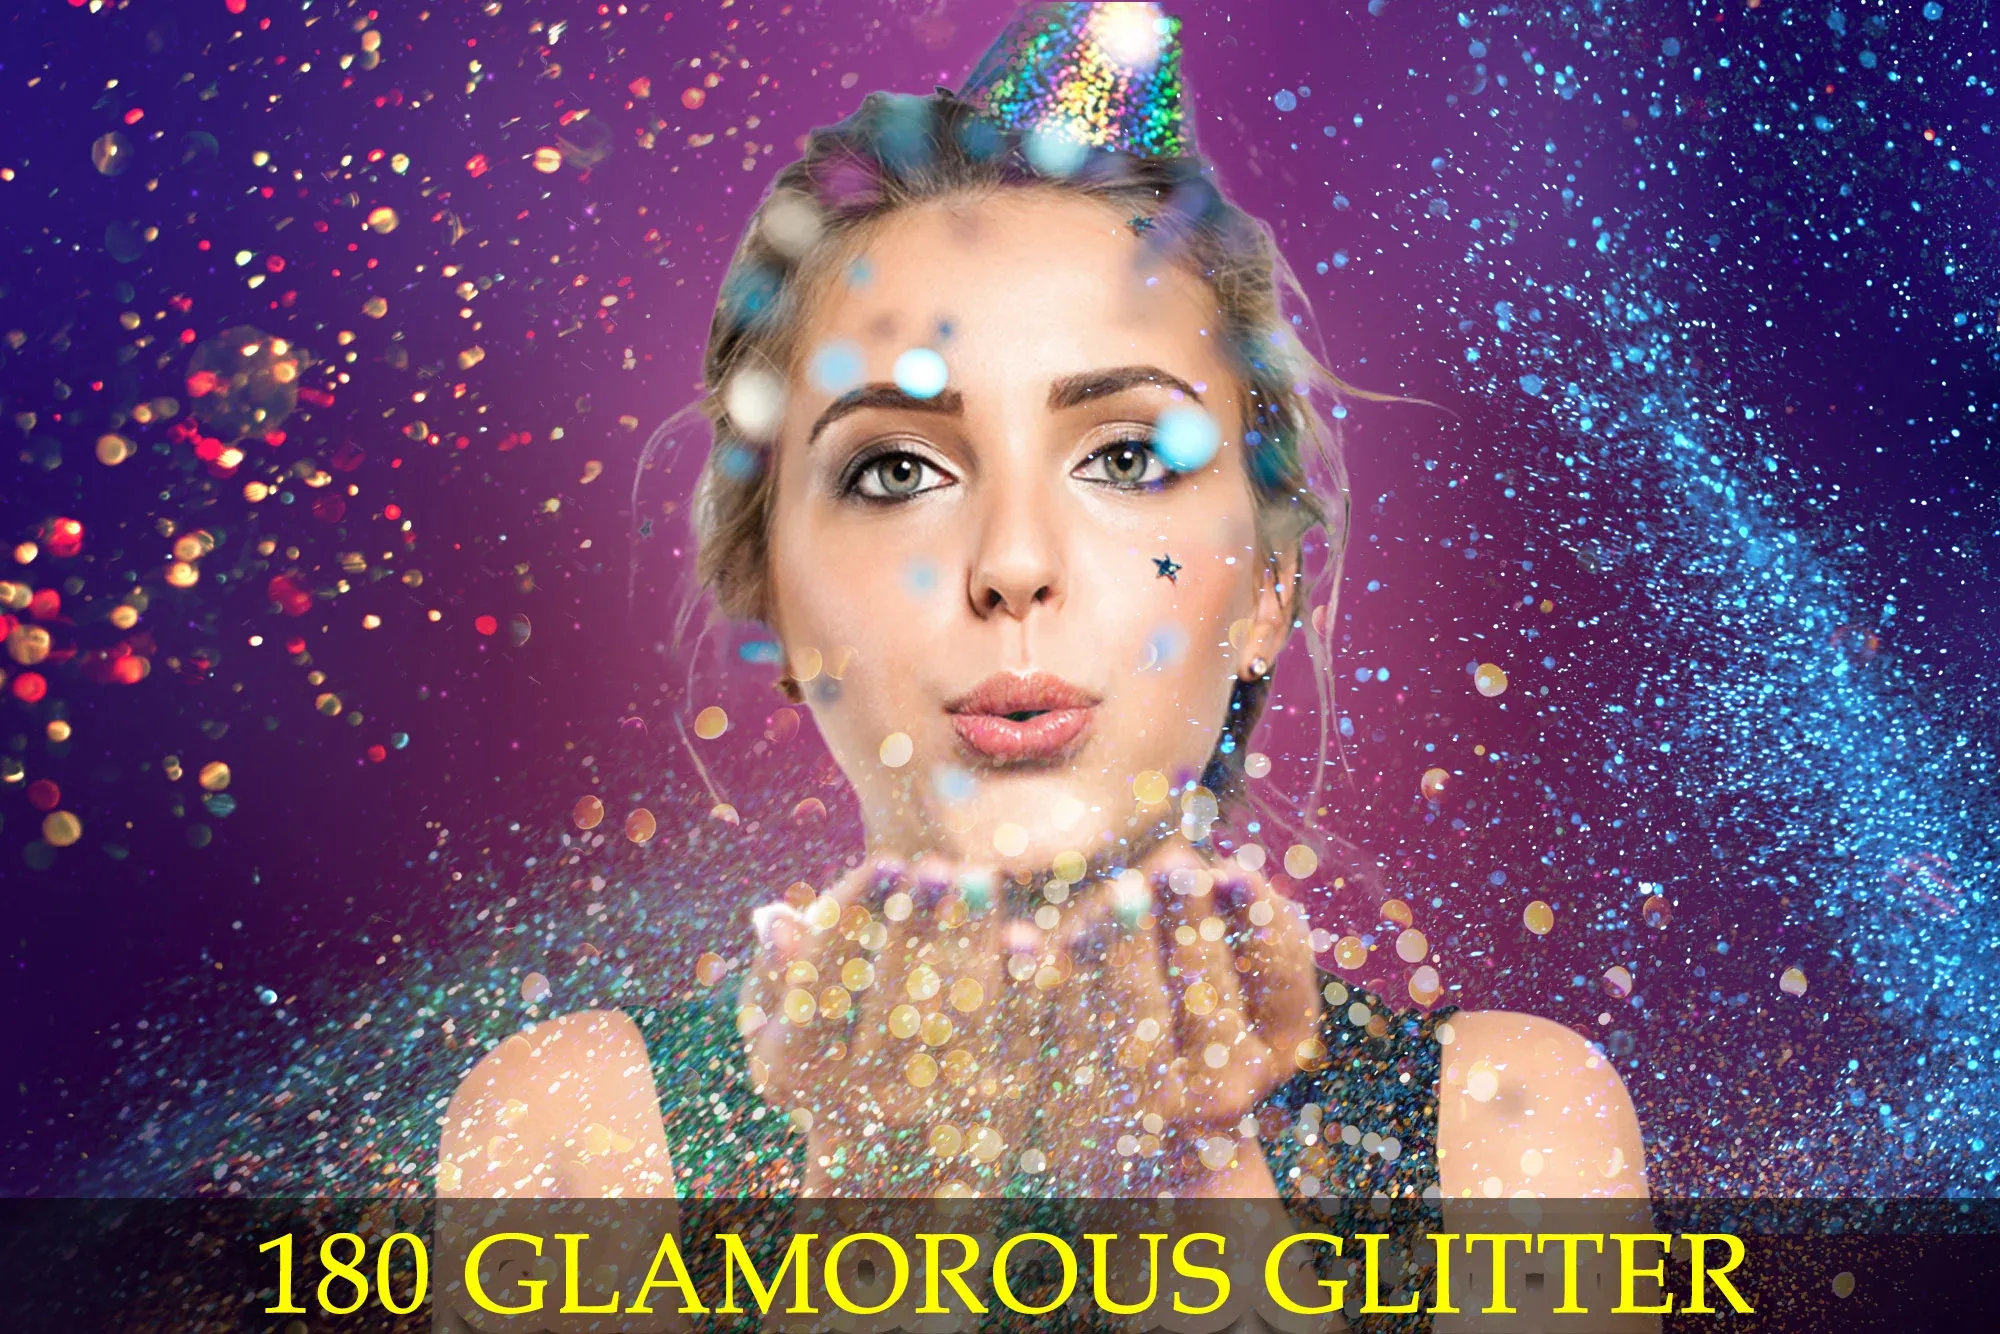 180 GLAMOROUS Glitter Dusts Overalys, Magic Glitter Overlay, Colored Fairy Dust, Blowing Glitter Photo Overlays, Glitter explosion particles